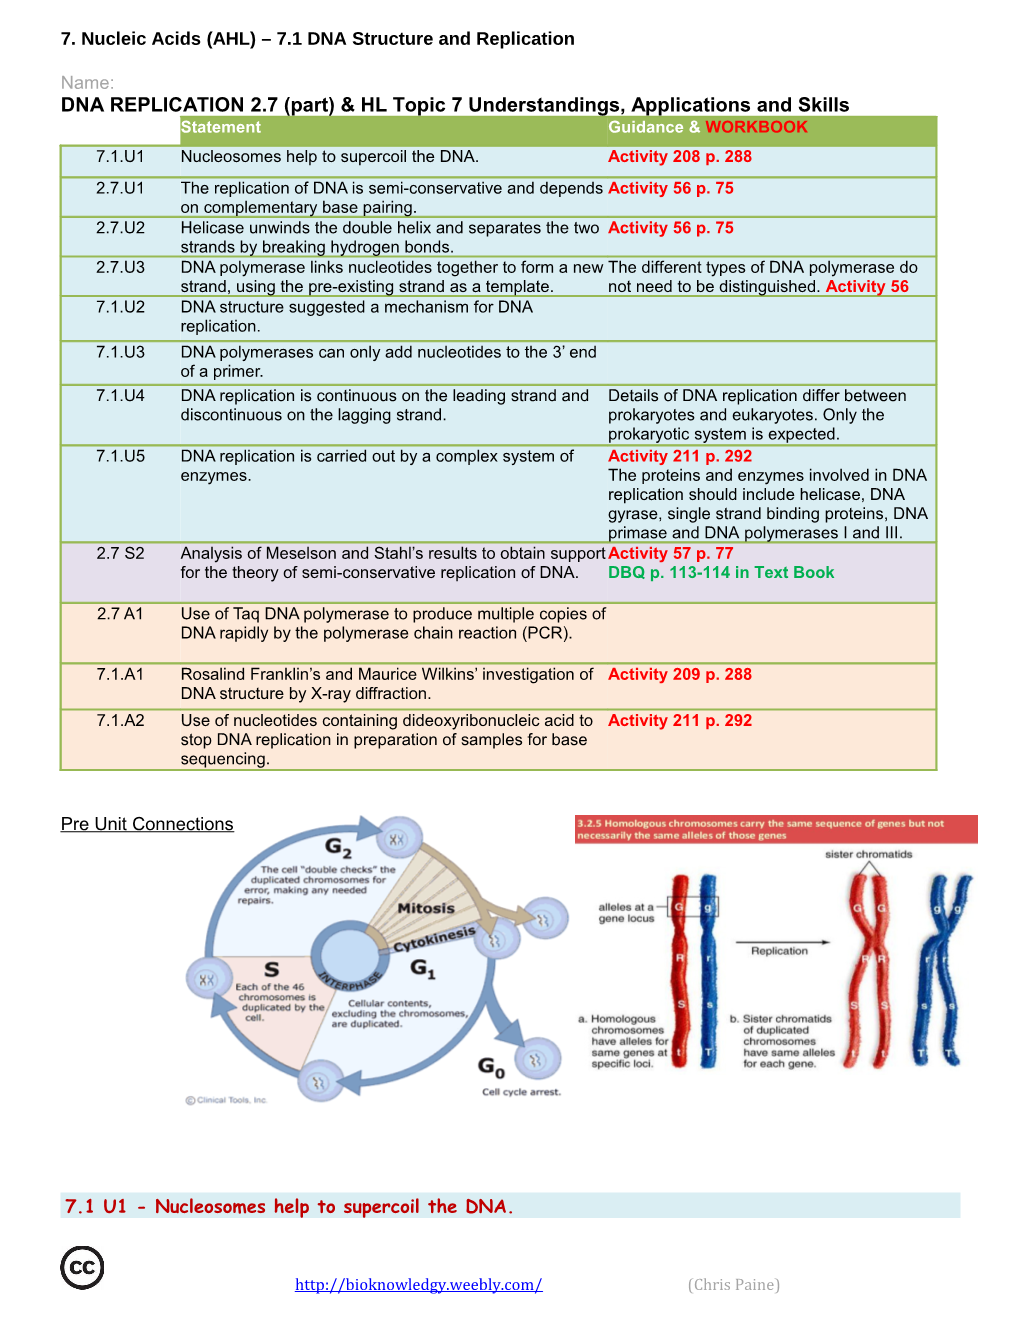 DNA REPLICATION 2.7 (Part) & HL Topic 7Understandings, Applications and Skills